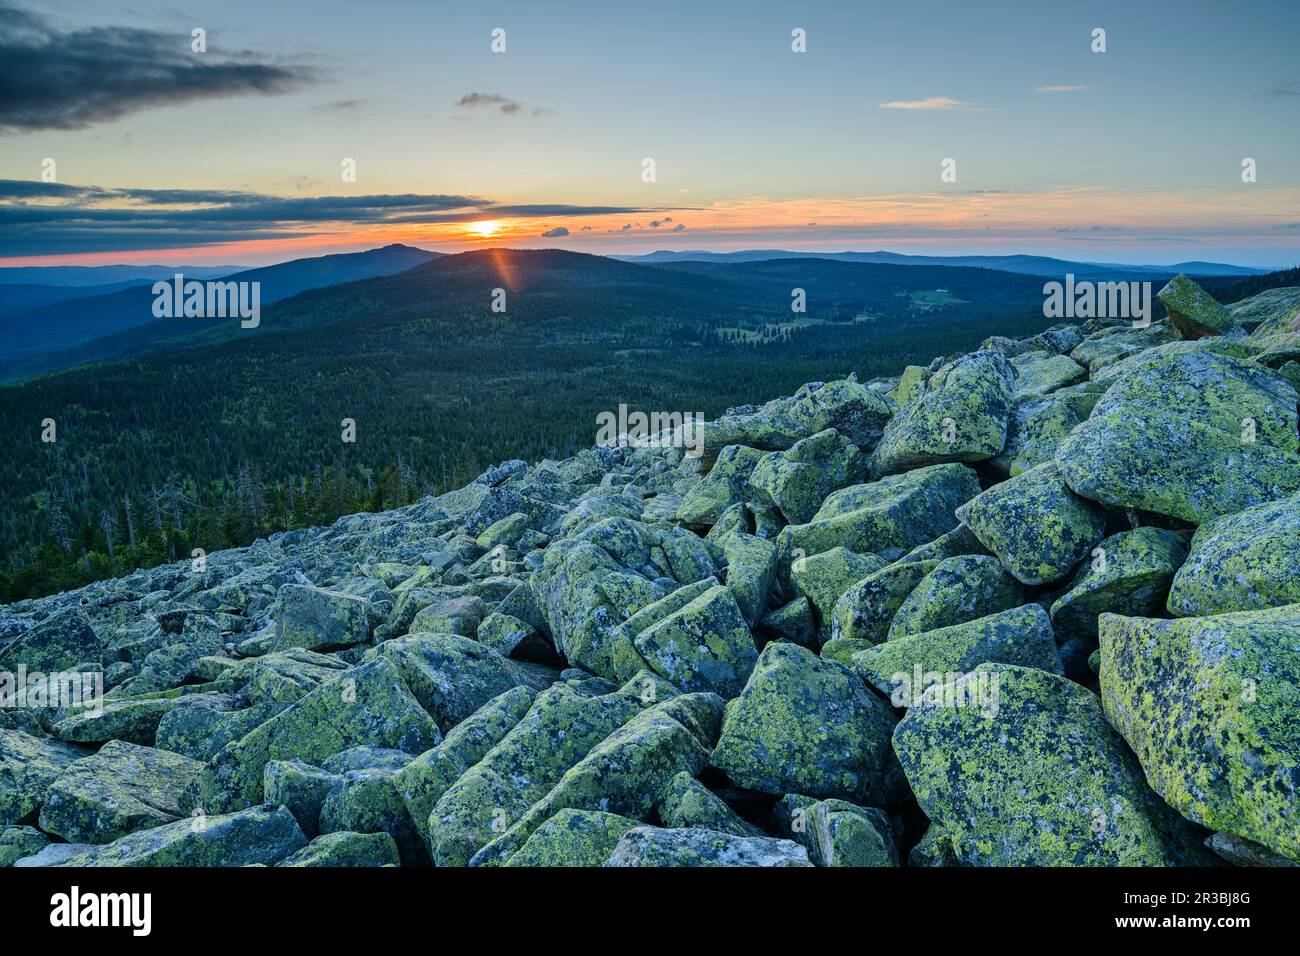 Germany, Bavaria, View from rocky summit of Lusen mountain at sunset Stock Photo